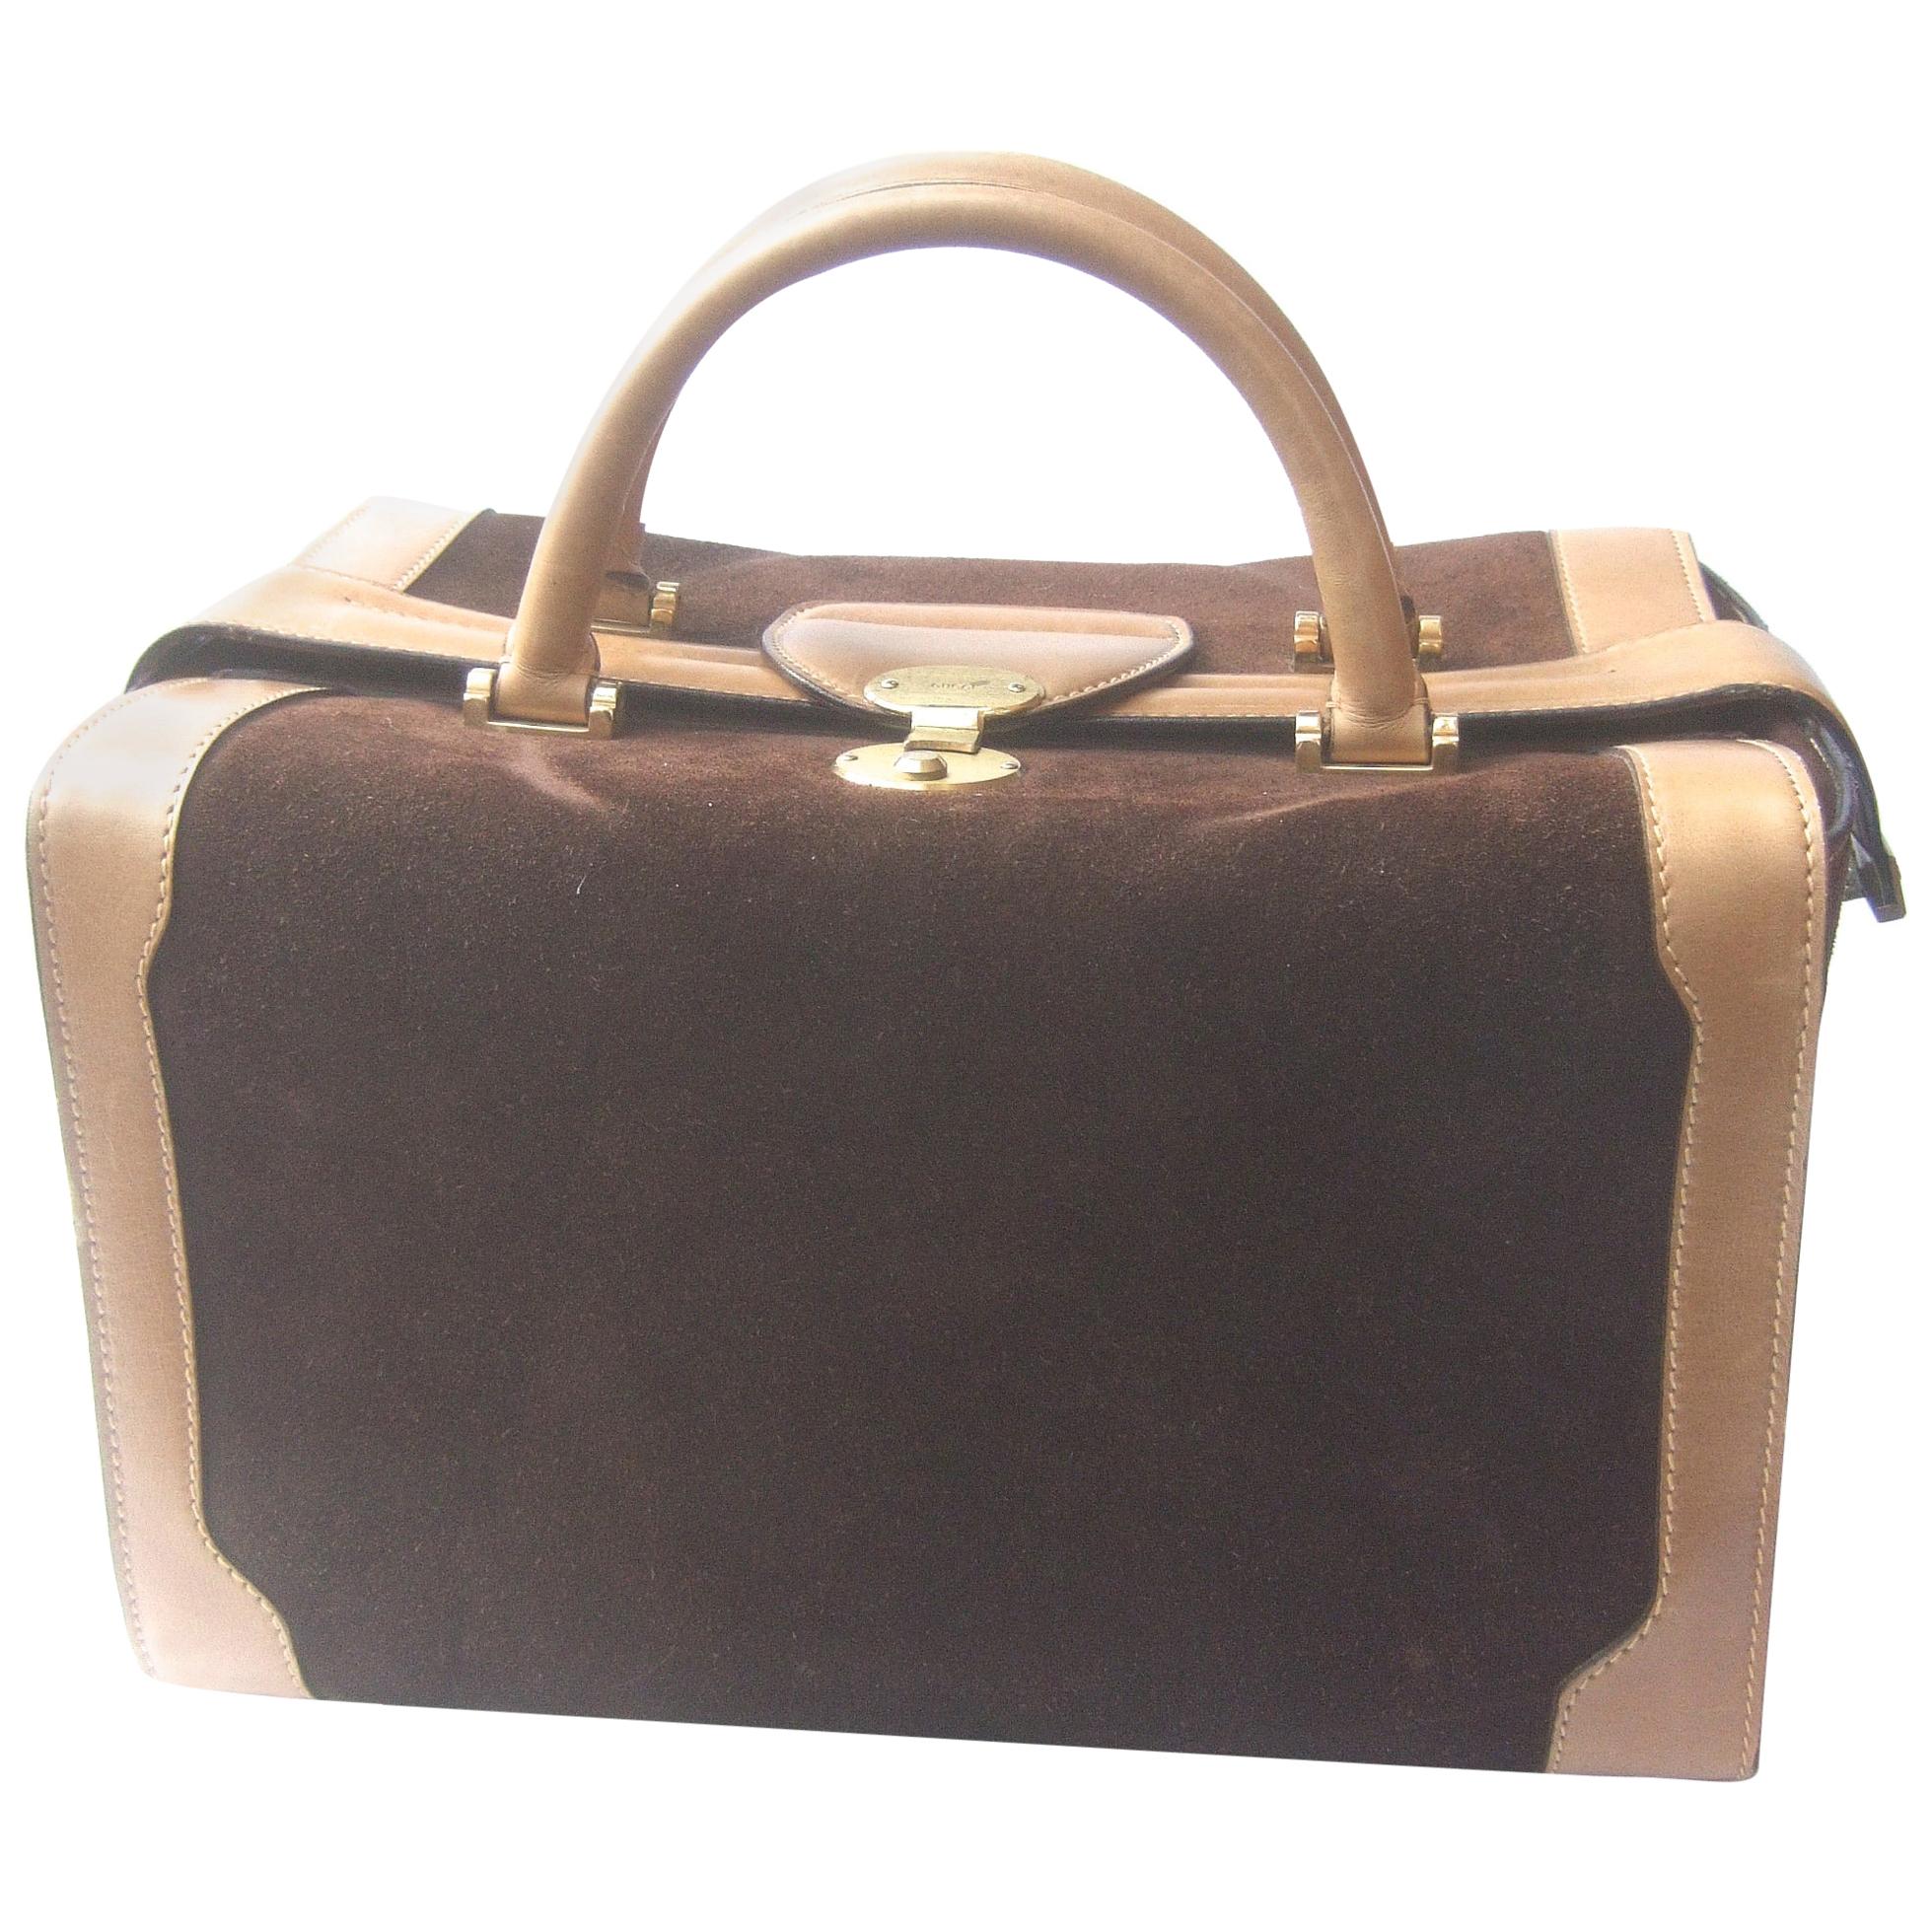 Gucci Italy Rare Chocolate Brown Suede Leather Trim Train Case c 1970s